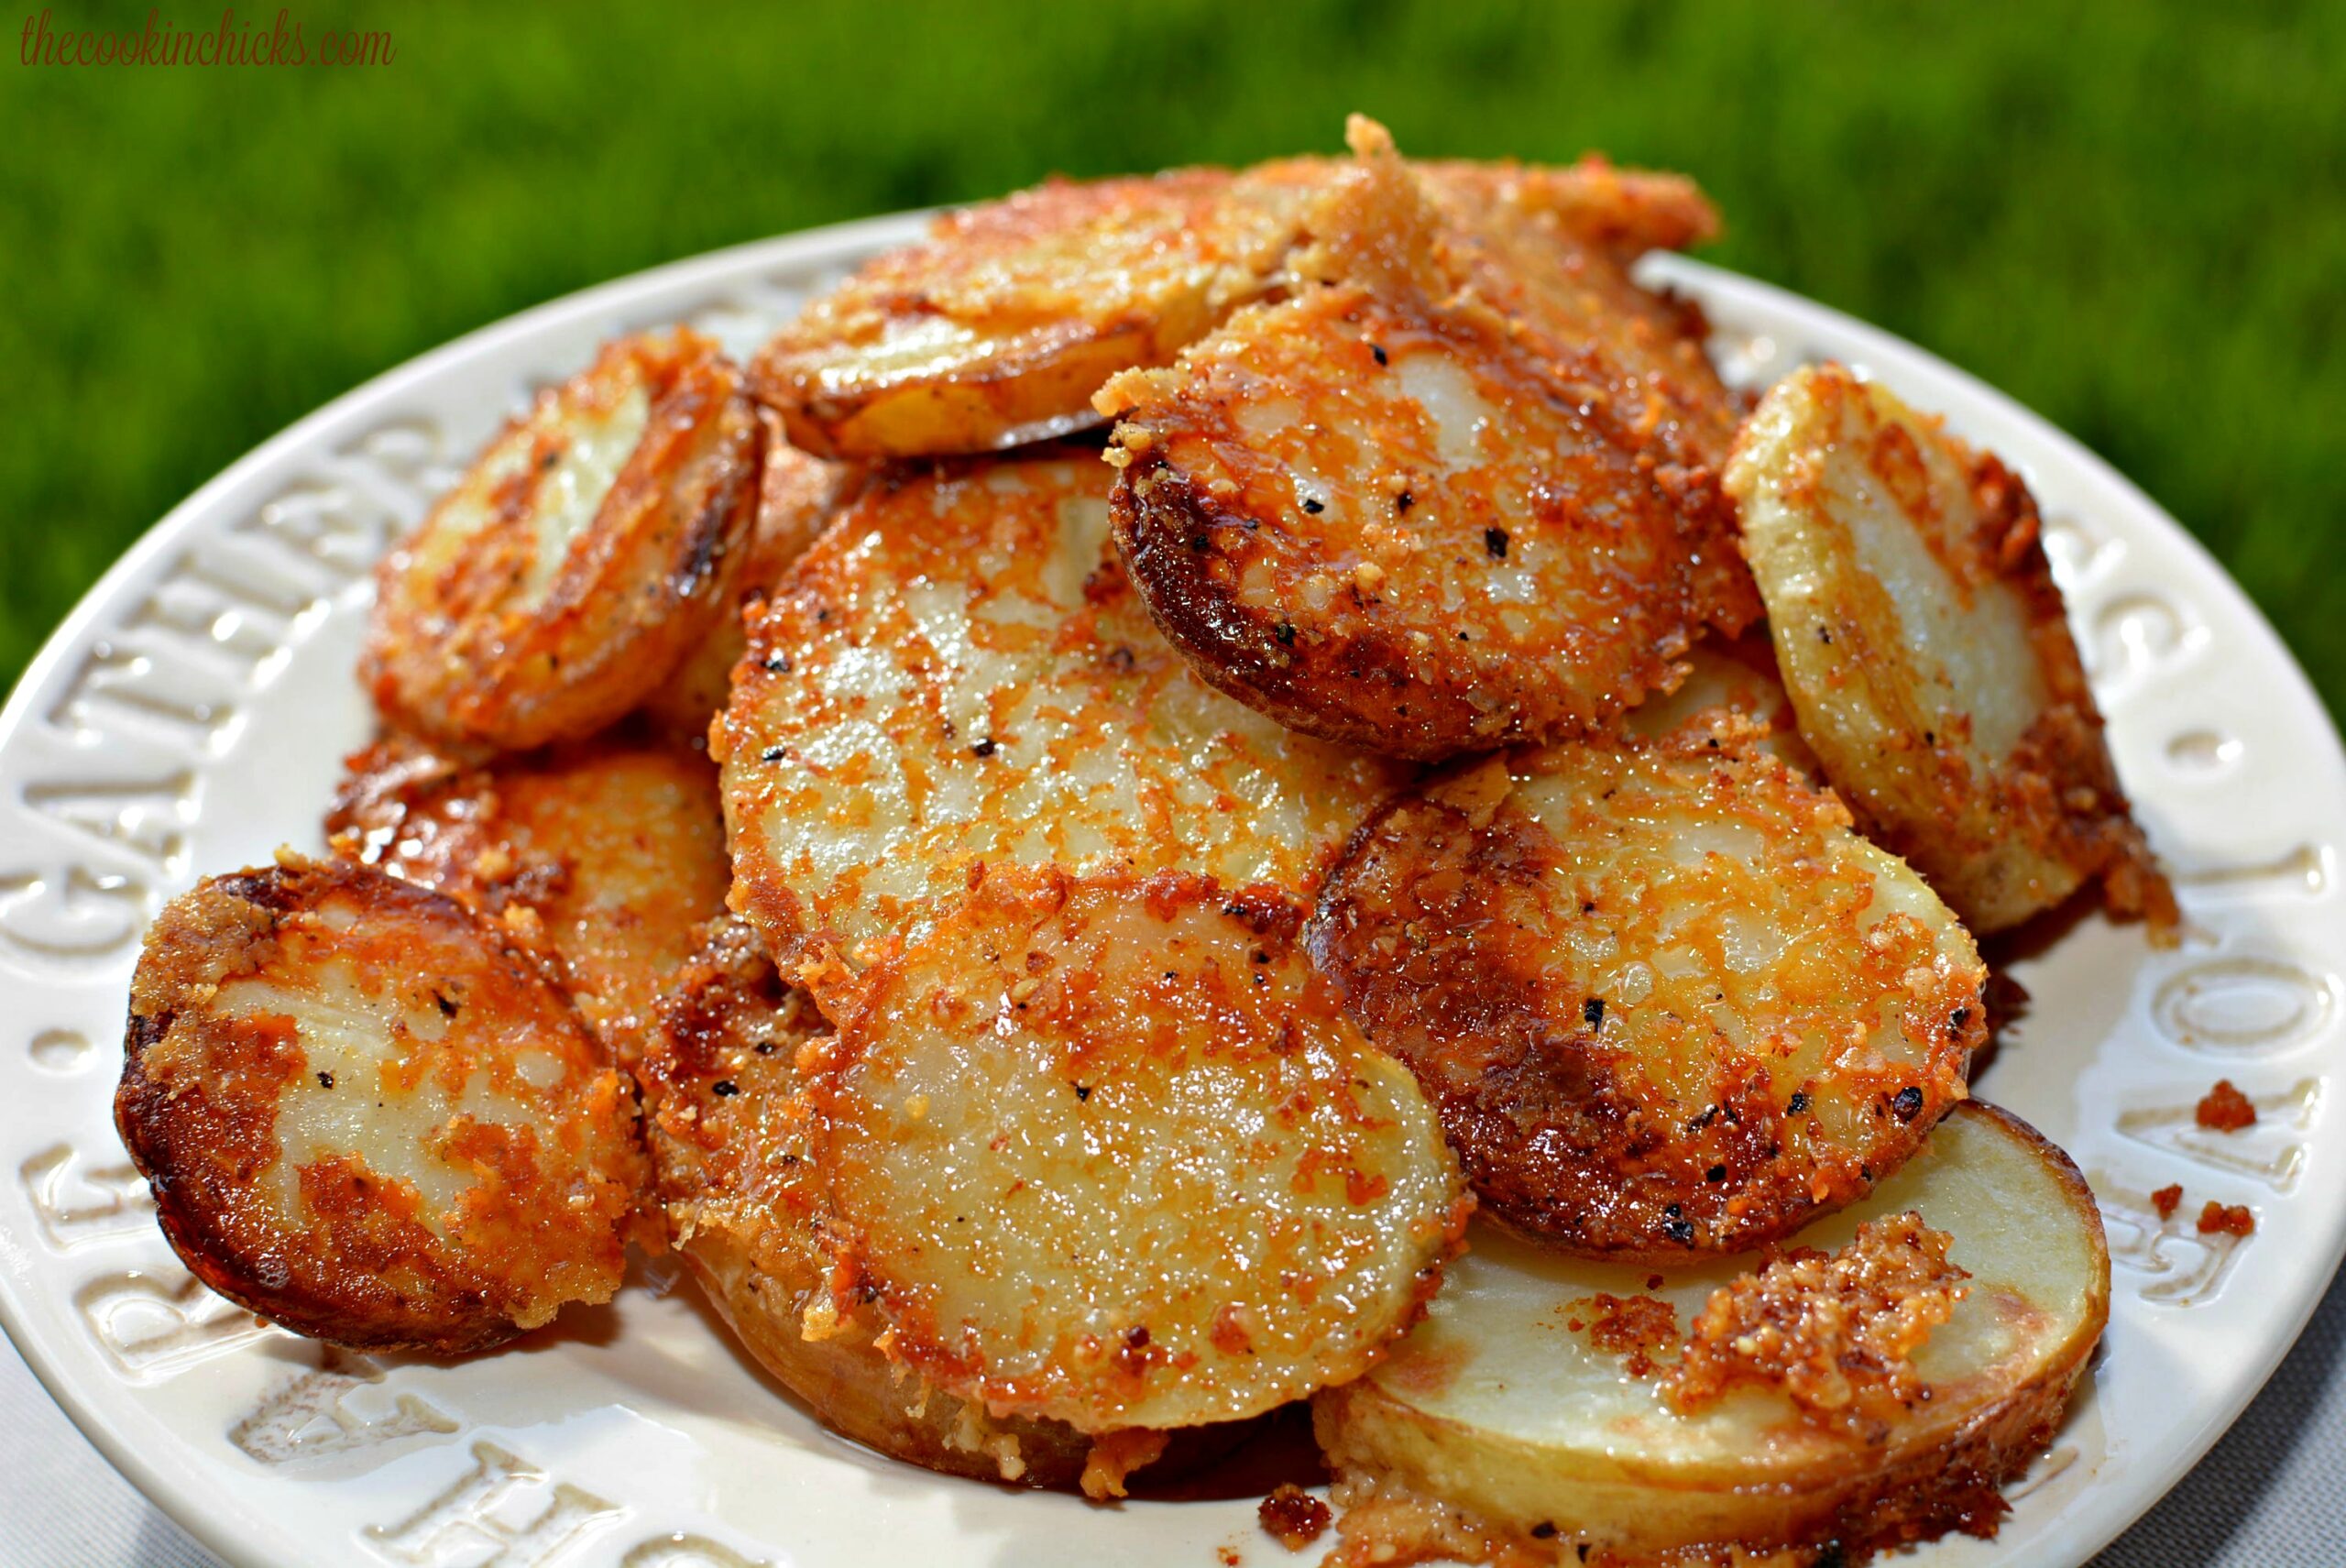 crispy potatoes coated in Parmesan and served on a plate.